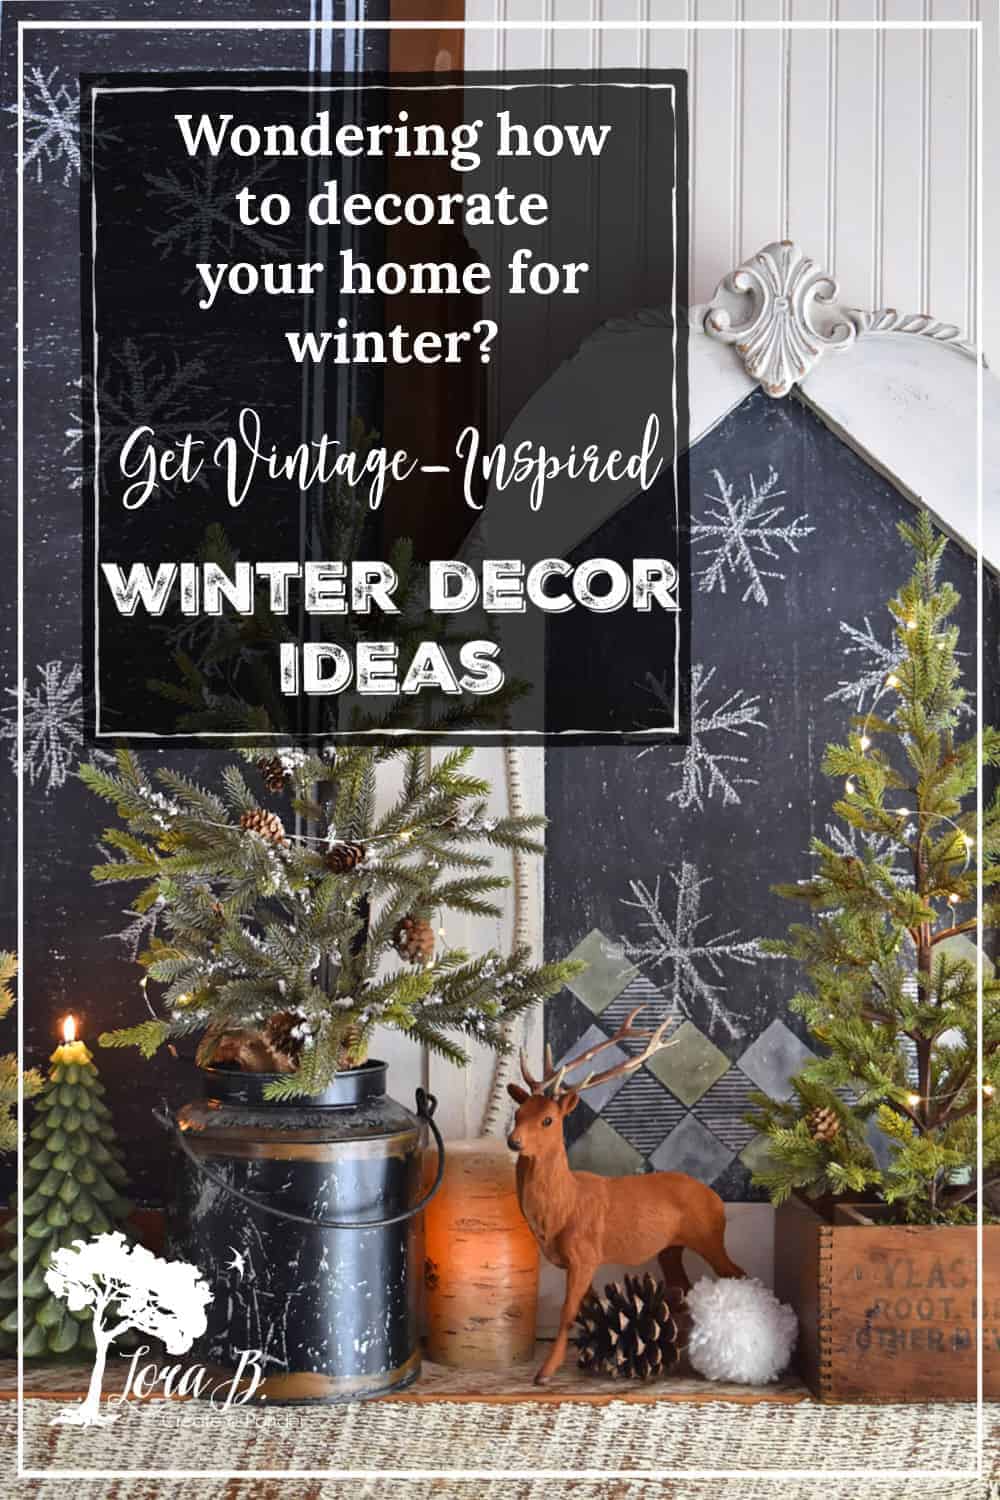 Winter Decorating Ideas to Enjoy Your Home All Season